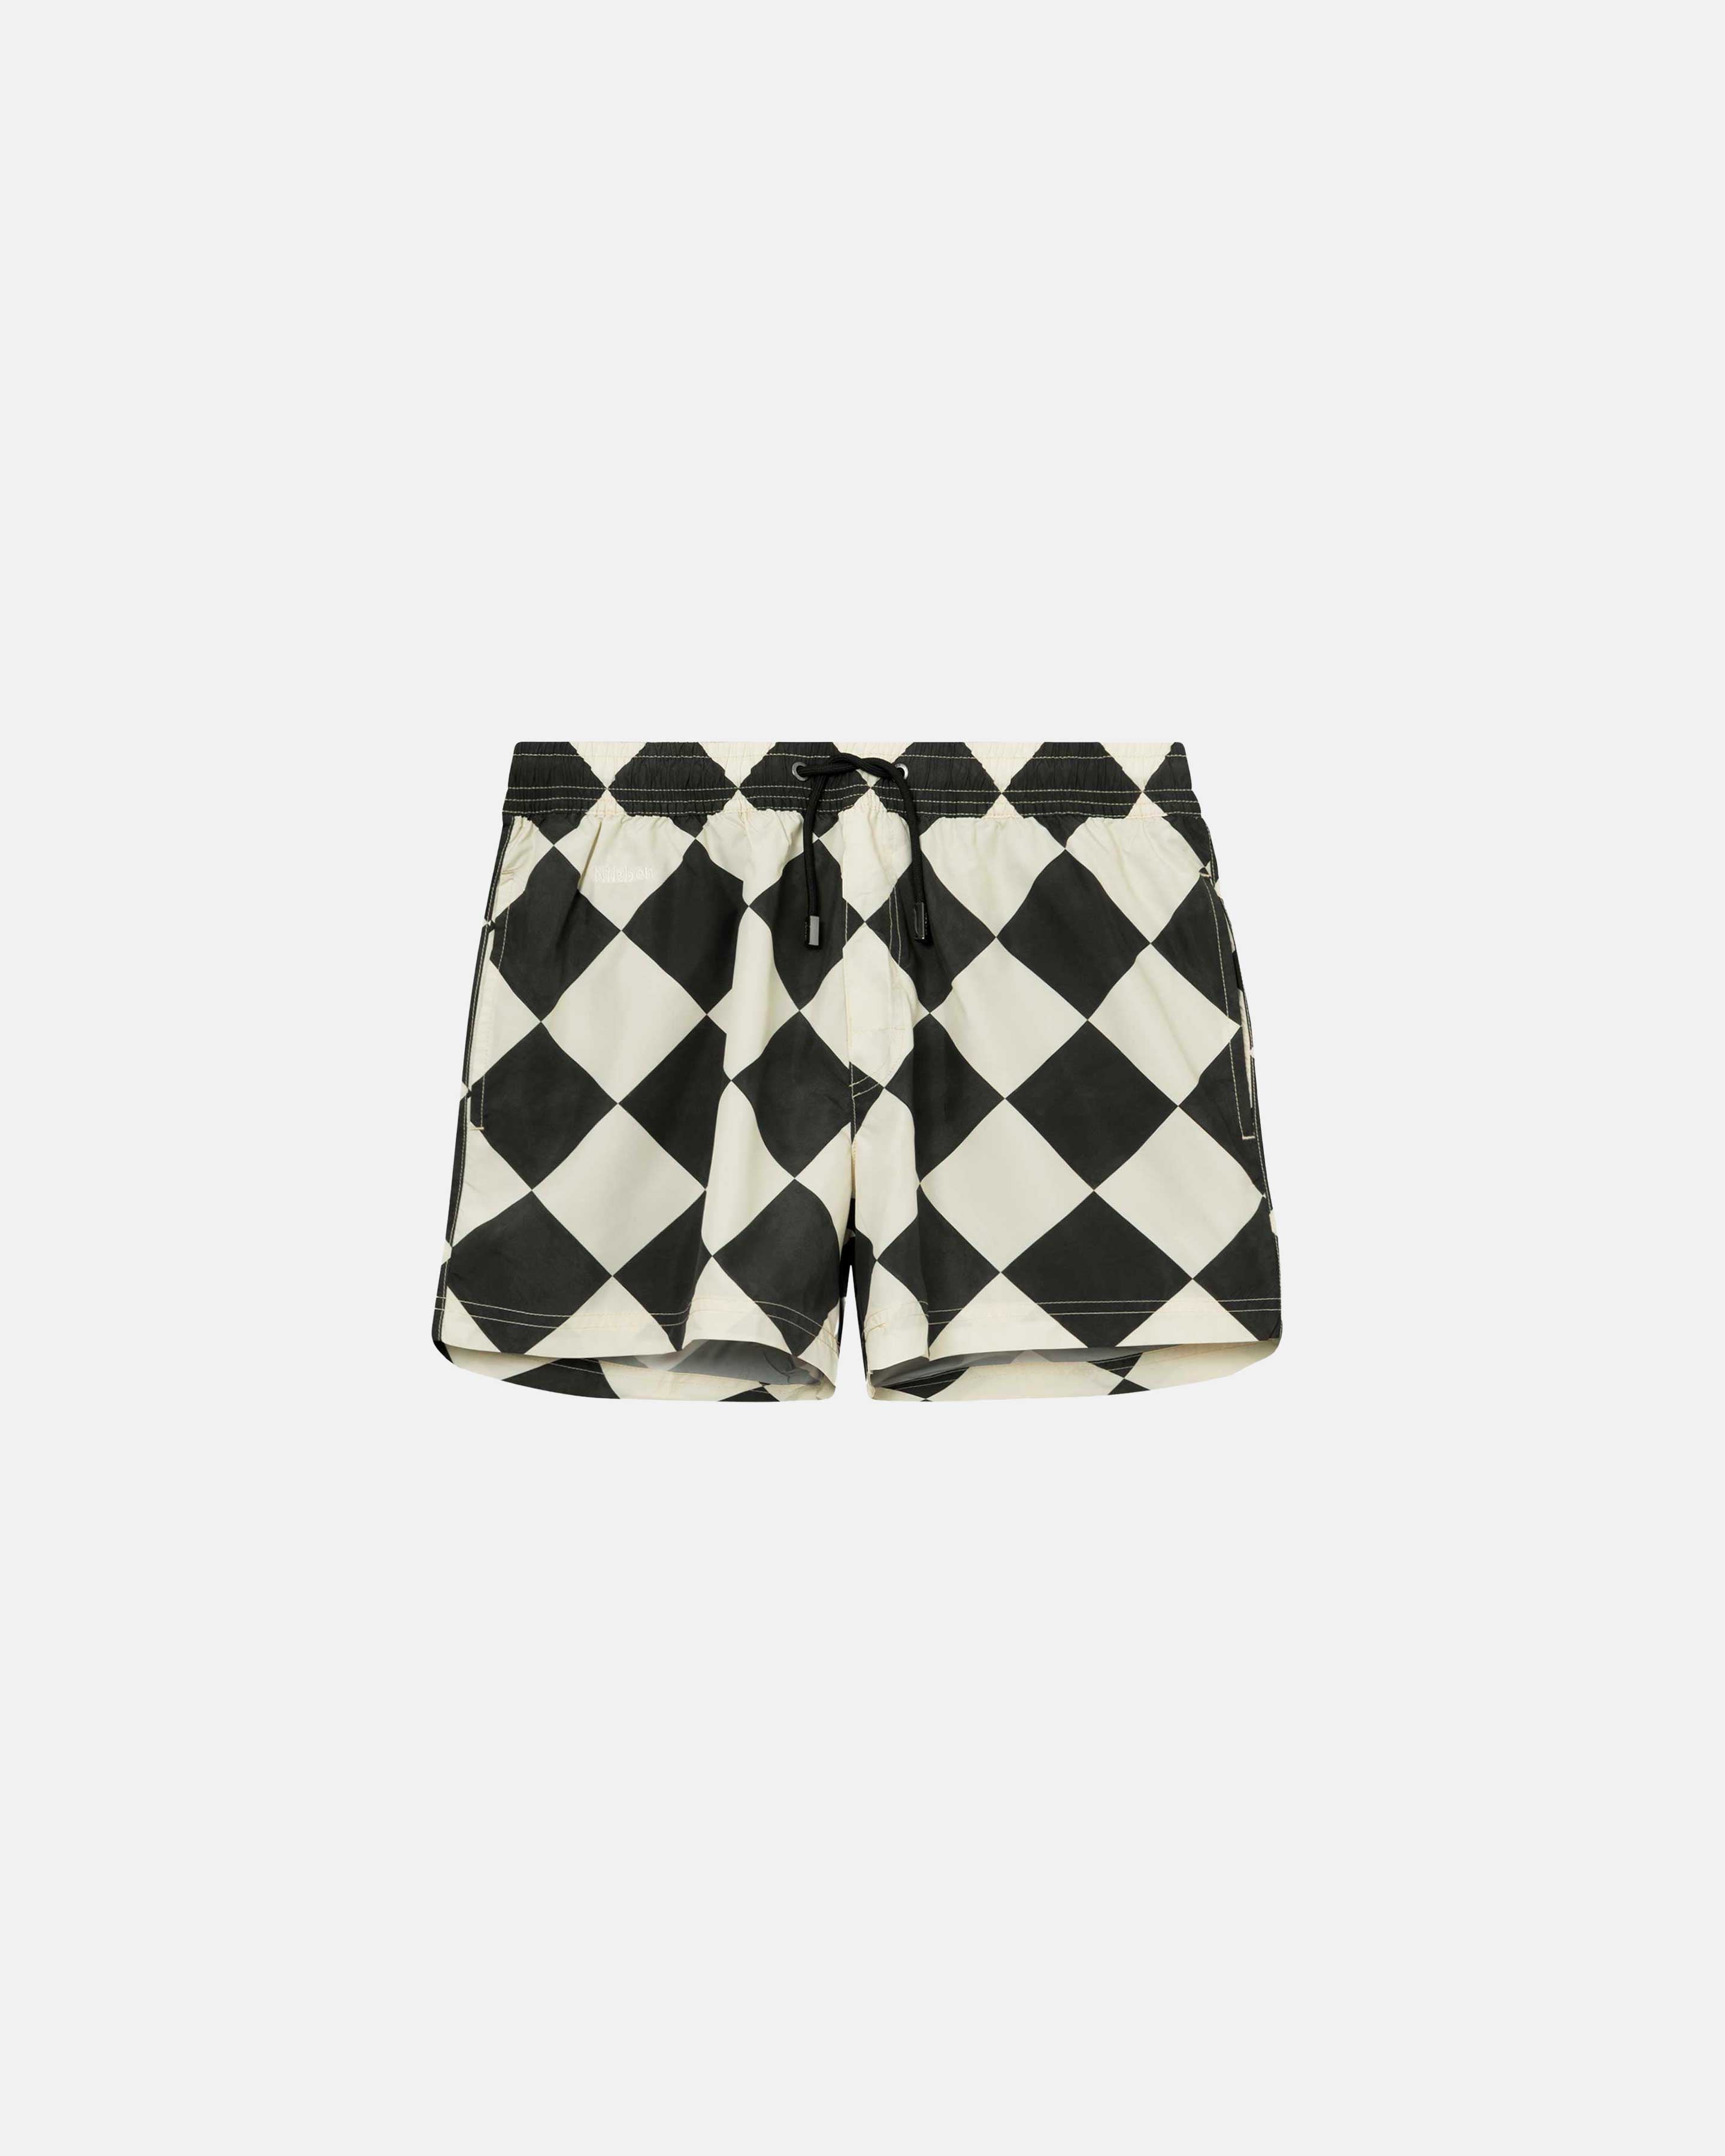 Black and white patterned swimming trunks. Mid length with drawstring and two side pockets.